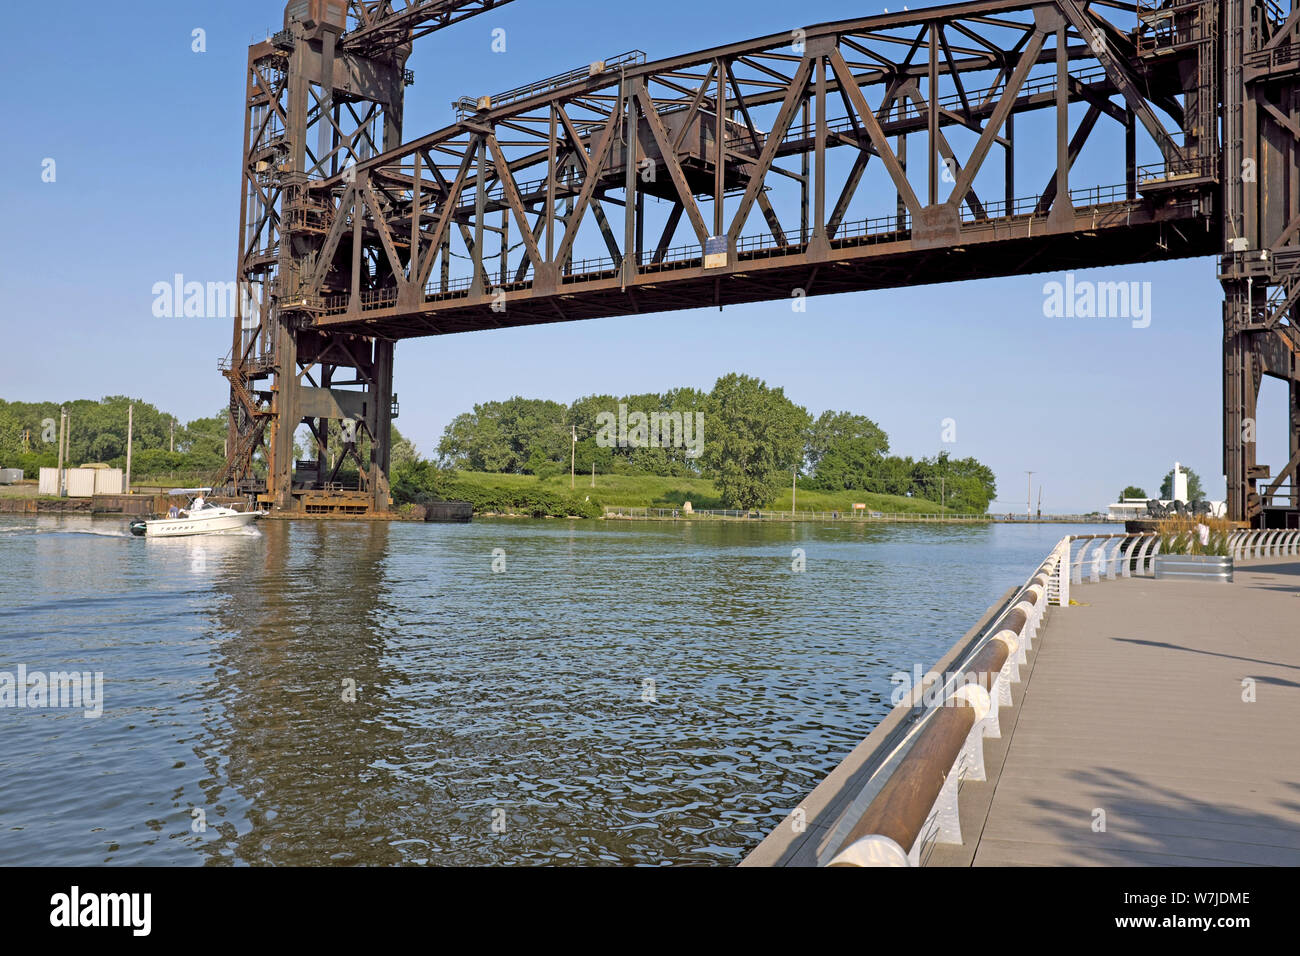 The NS1 lift bridge, operated by Norfolk Southern, spans the Cuyahoga River near the Lake Erie confluence in Cleveland, Ohio, USA. Stock Photo